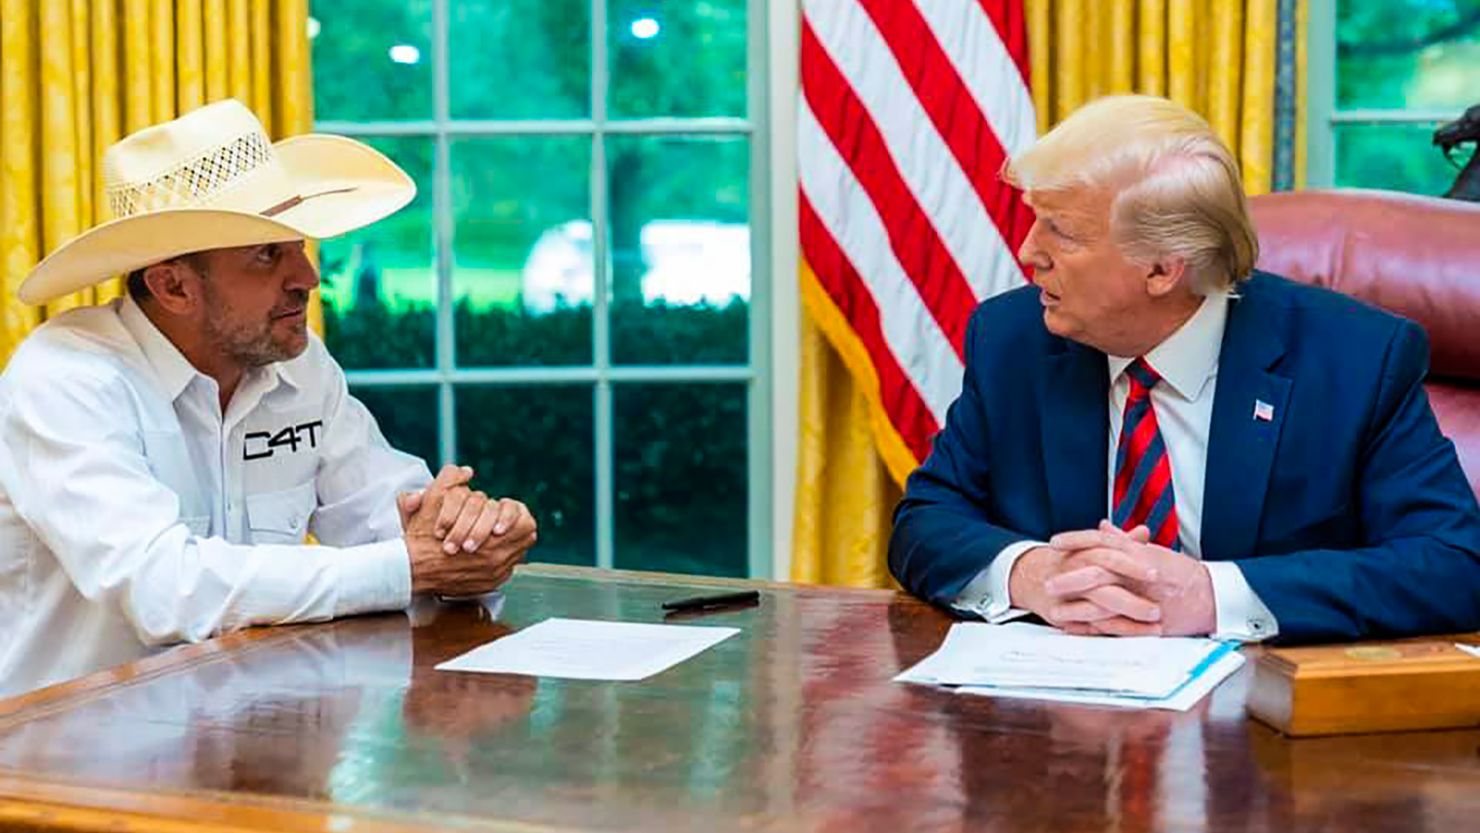 Couy Griffin poses with President Donald Trump in the Oval Office of the White House on September 12, 2019. Note: This photo has been removed from the White House Flickr page.